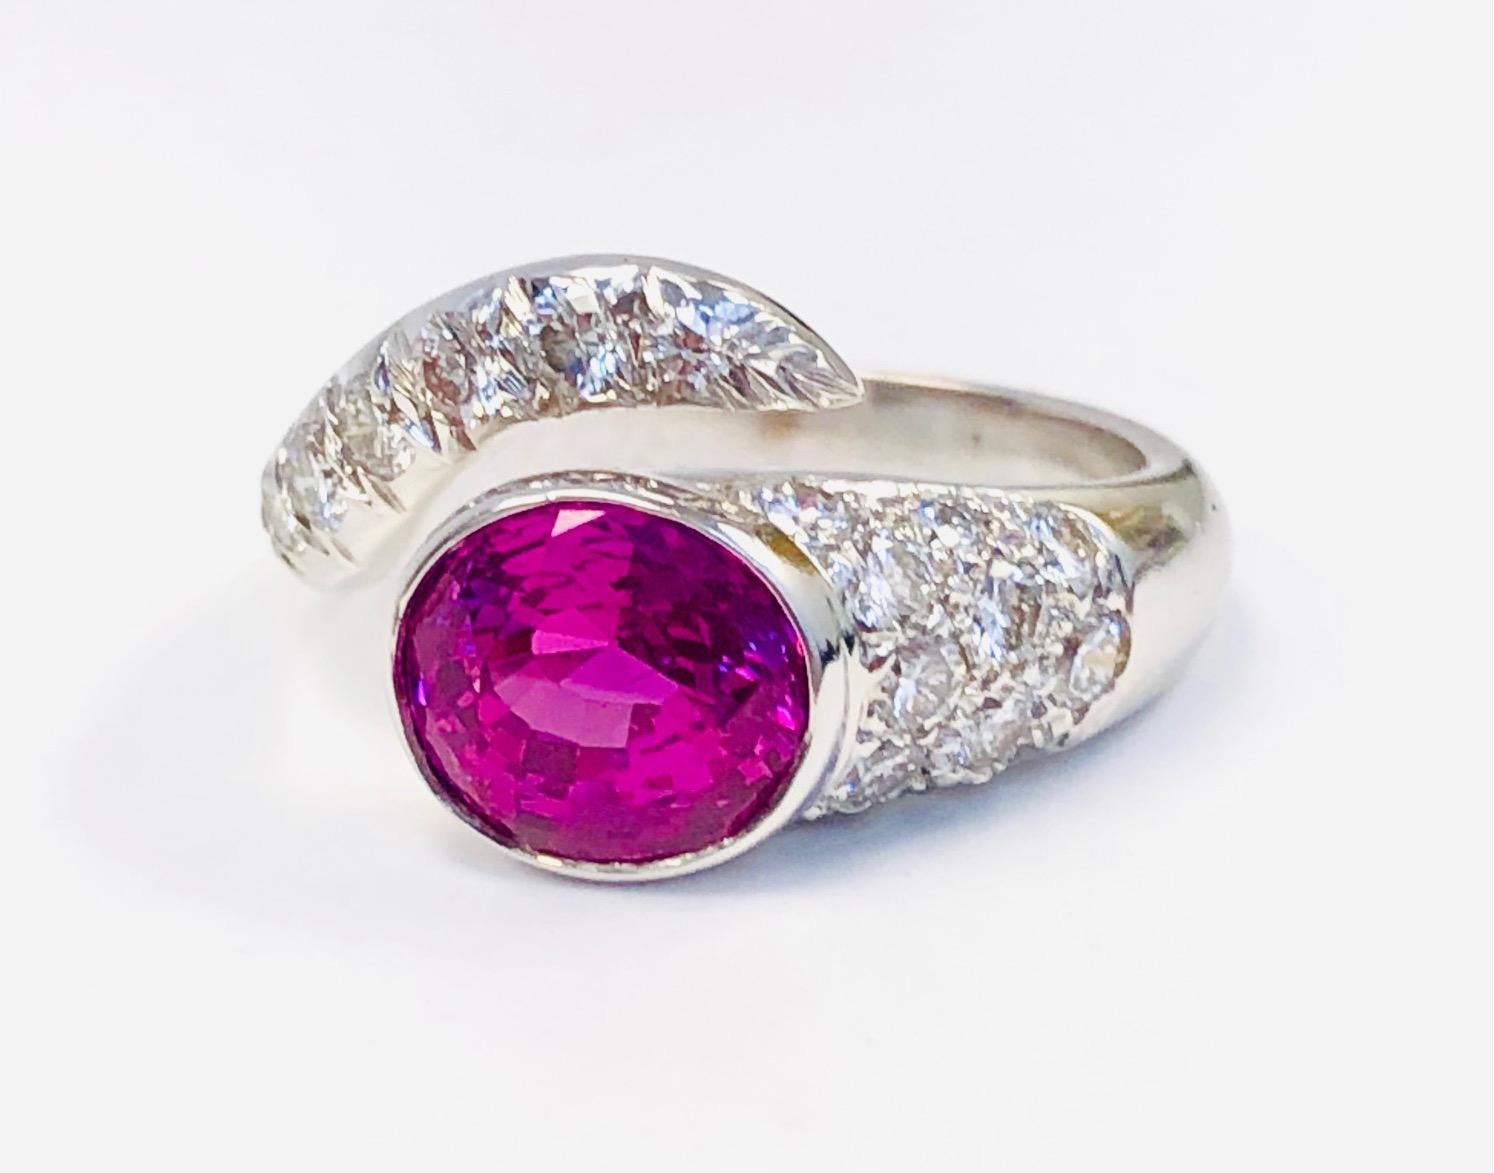 This modern twist Rind is made in 18 Karat White Gold, set with 19 fine Diamonds 0.74 carats and a gorgeous color Pink Sapphire 2.28 carats. This is the most Brilliant Pink Sapphire we have seen in a very long time!

We design and manufacture our